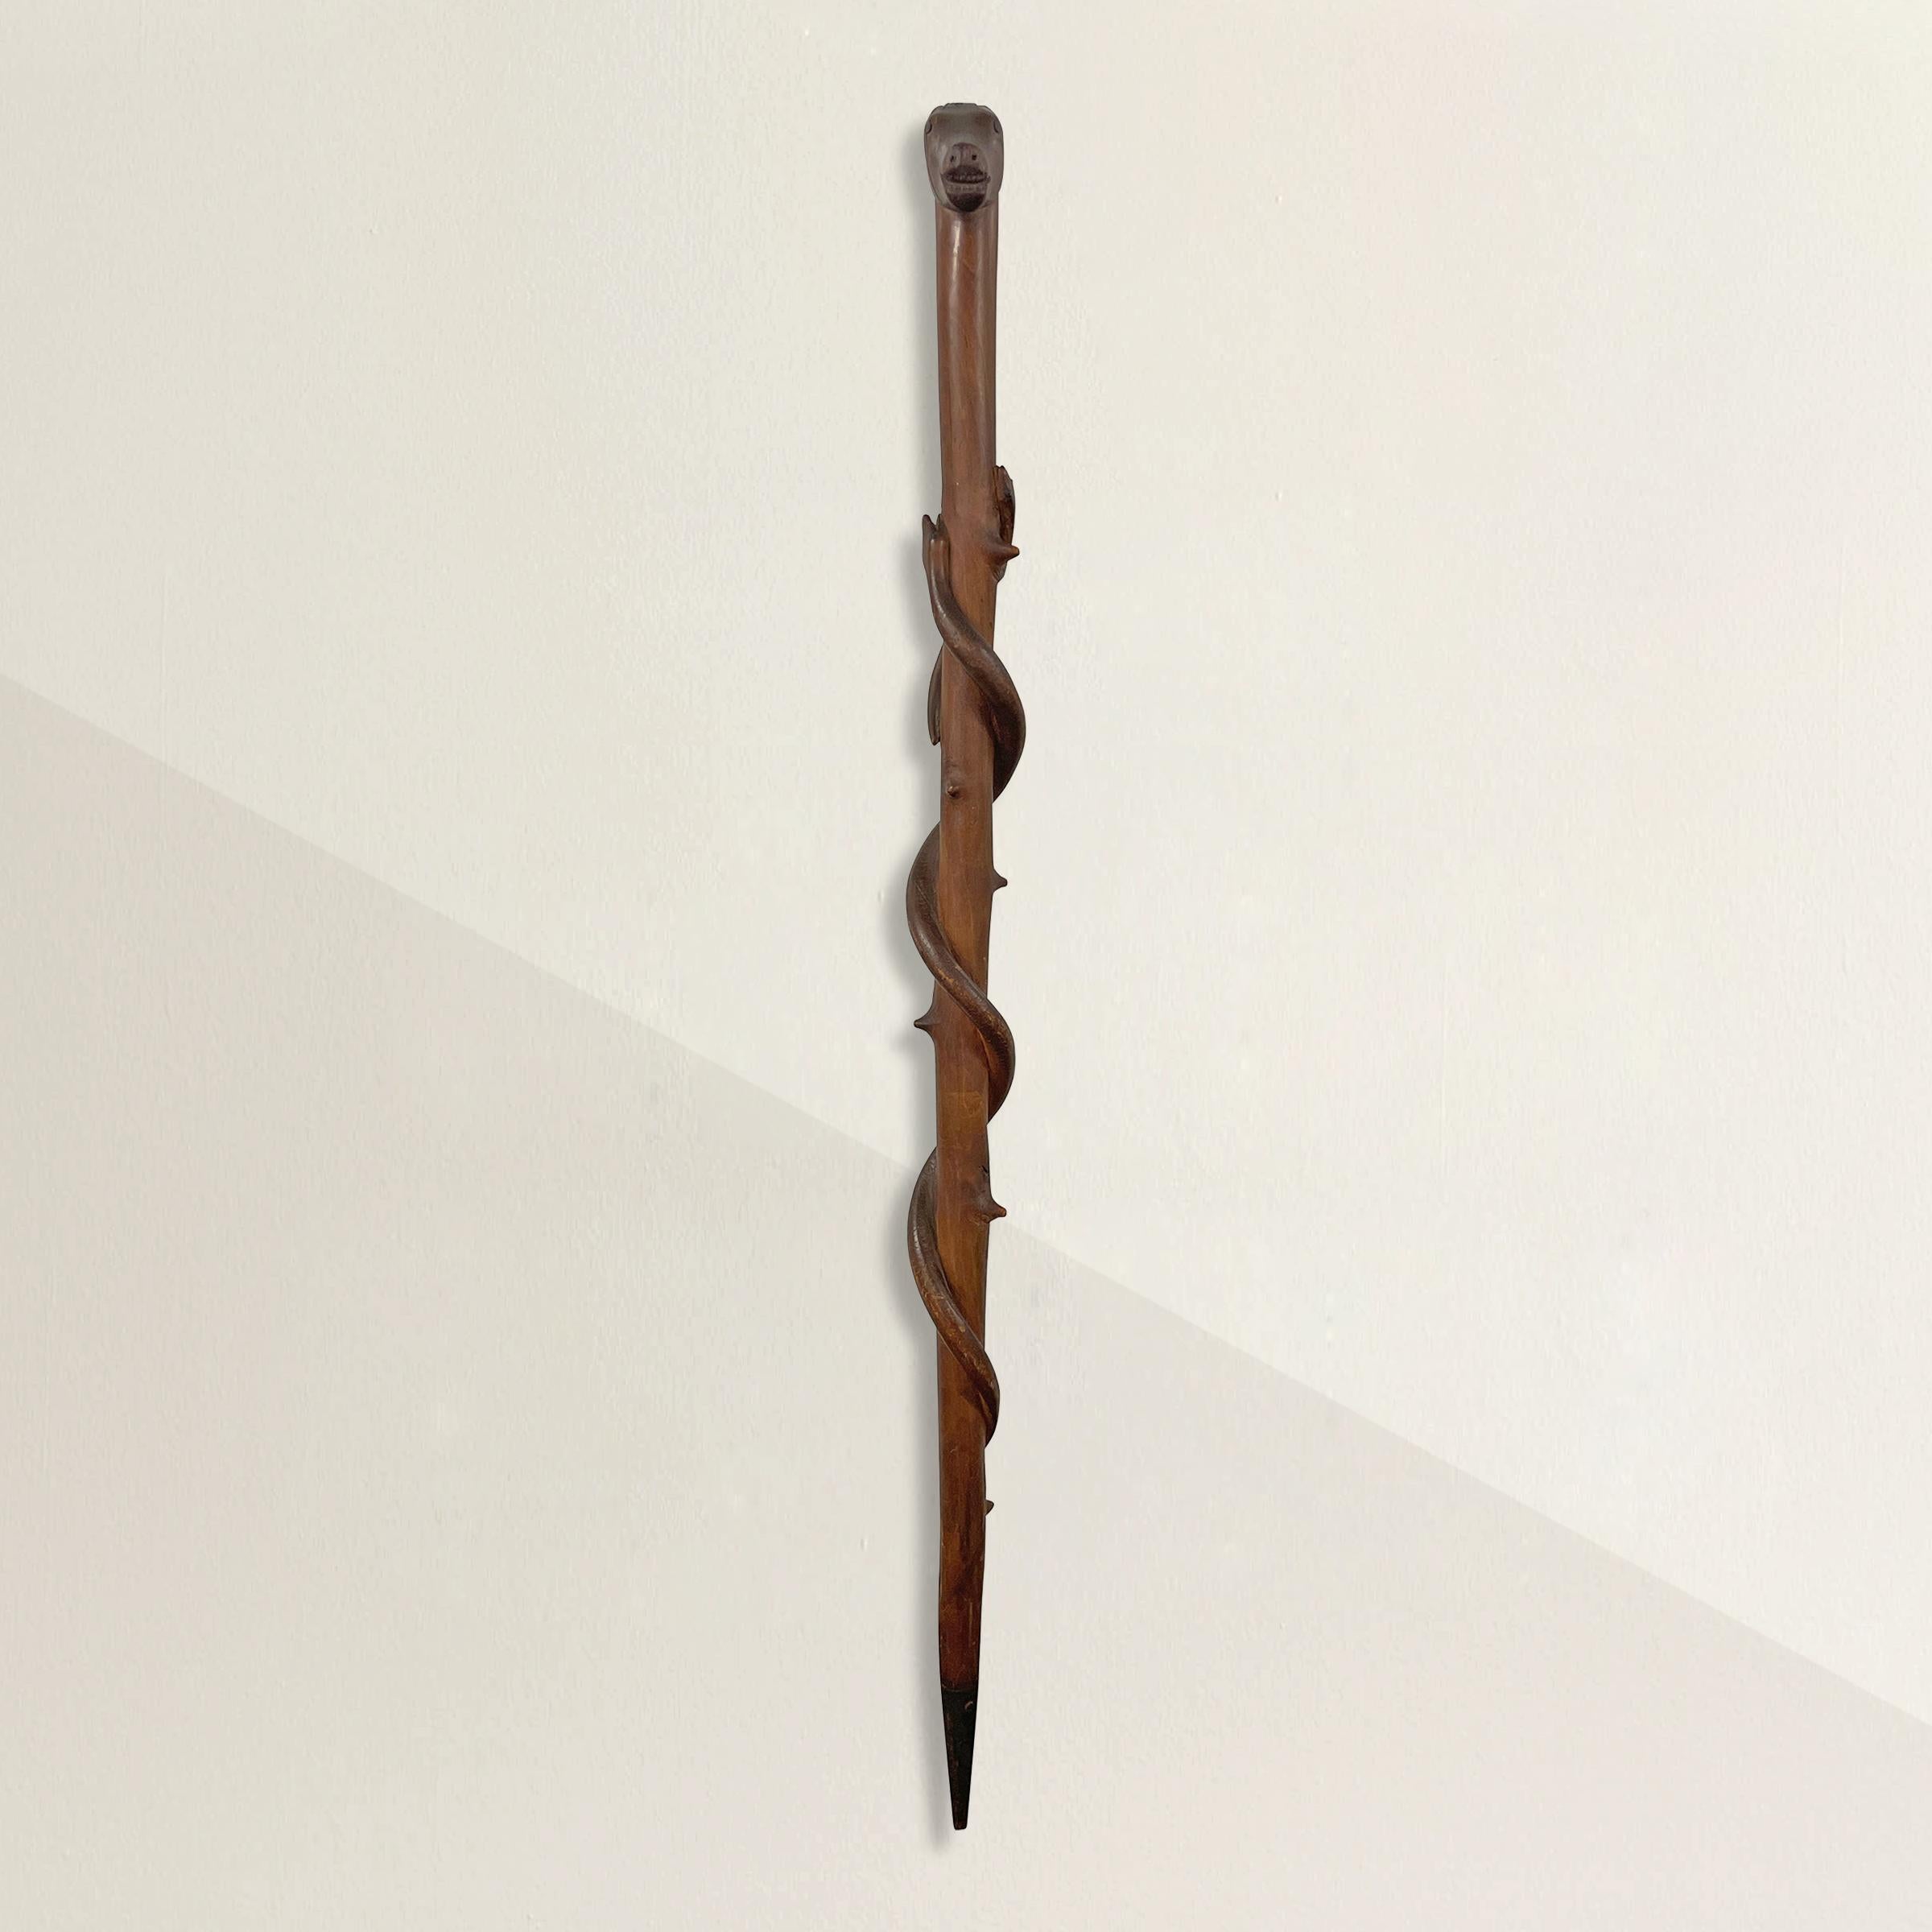 A whimsical late 19th century American Folk Art carved wood walking stick depicting a horse-head handle and a snake chasing a lizard around a thorny staff, with a pointed iron tip. The staff comes with a custom steel wall mount so the staff can be